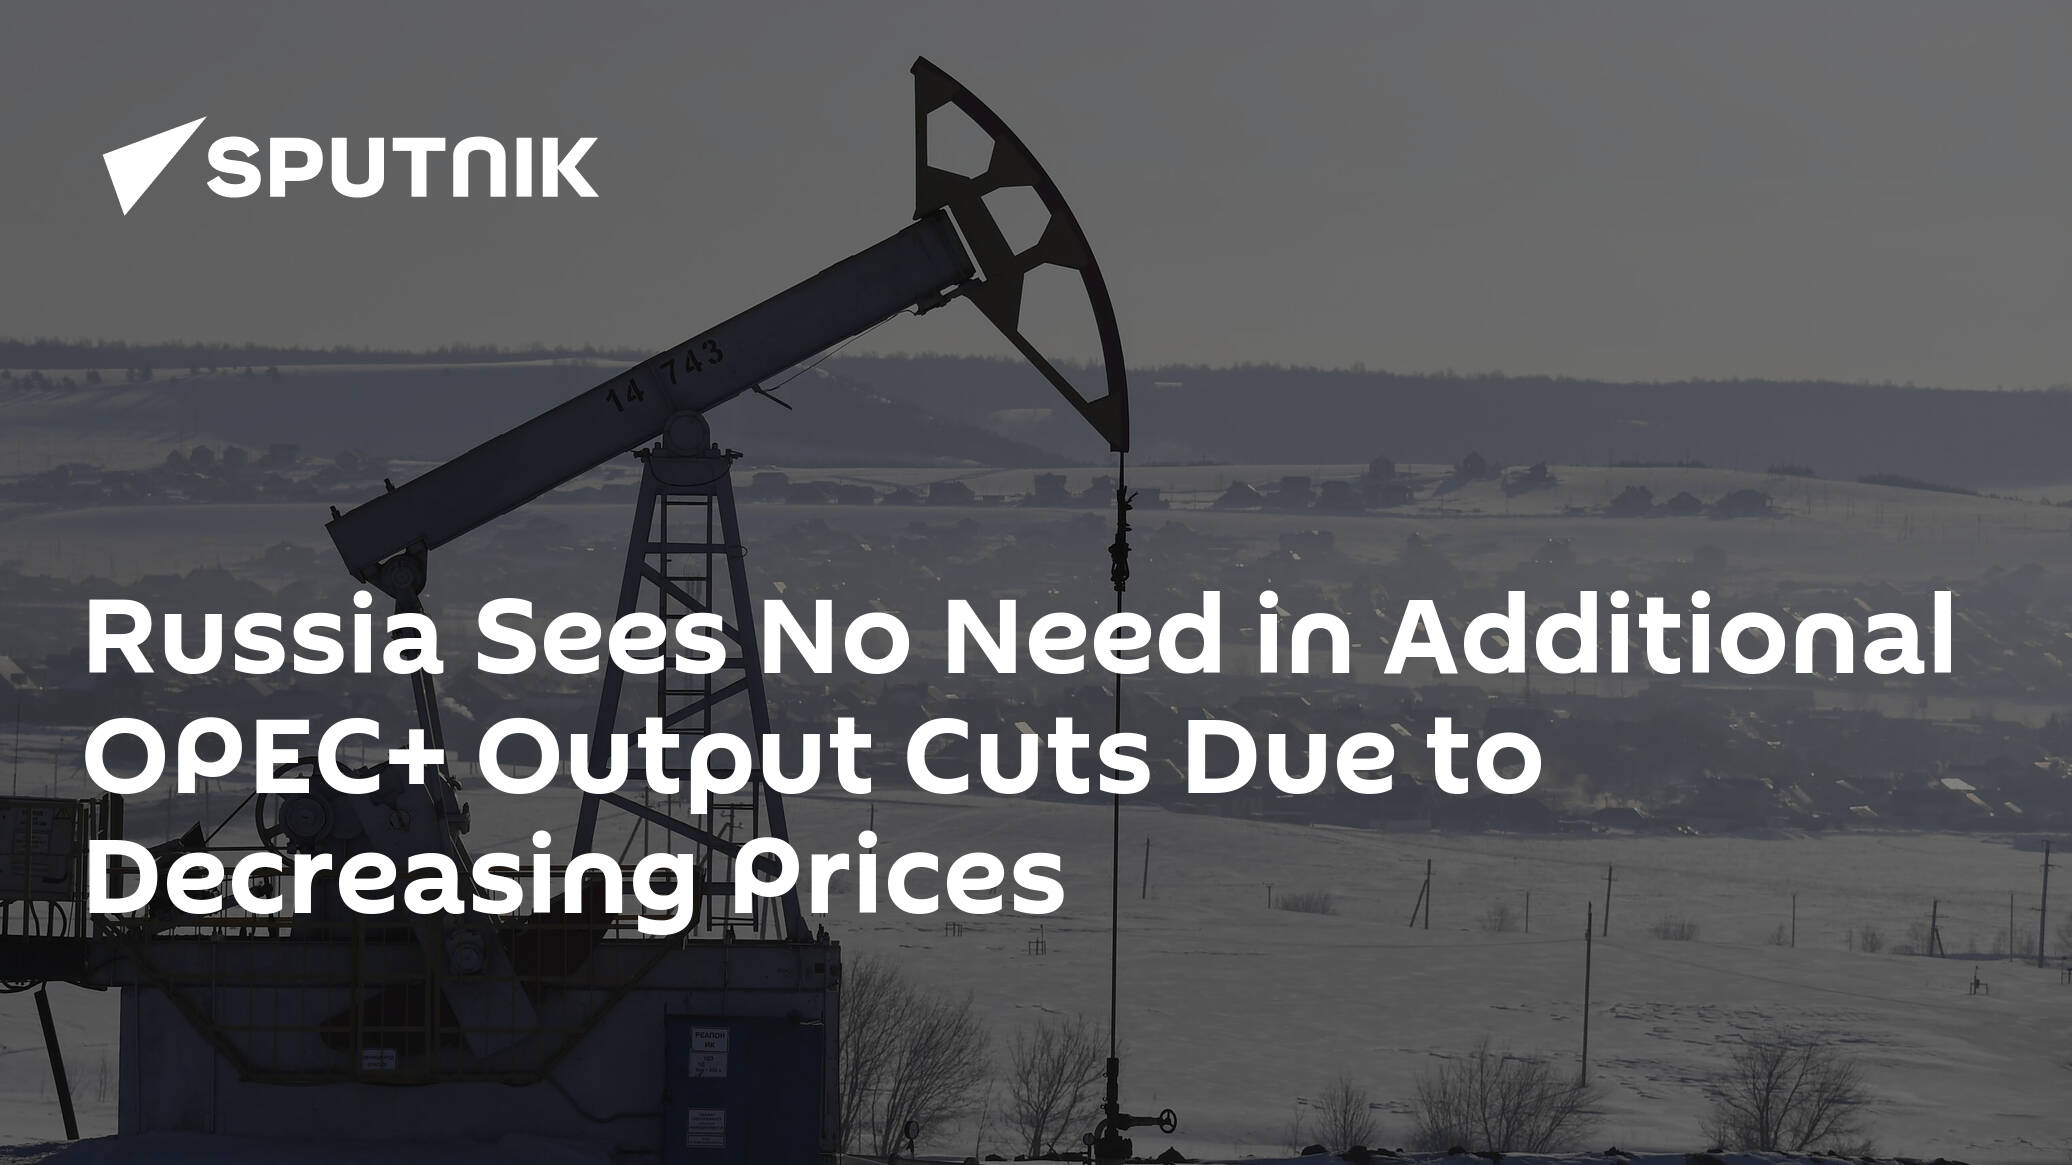 Russia Sees No Need in Additional OPEC+ Output Cuts Due to Decreasing Prices